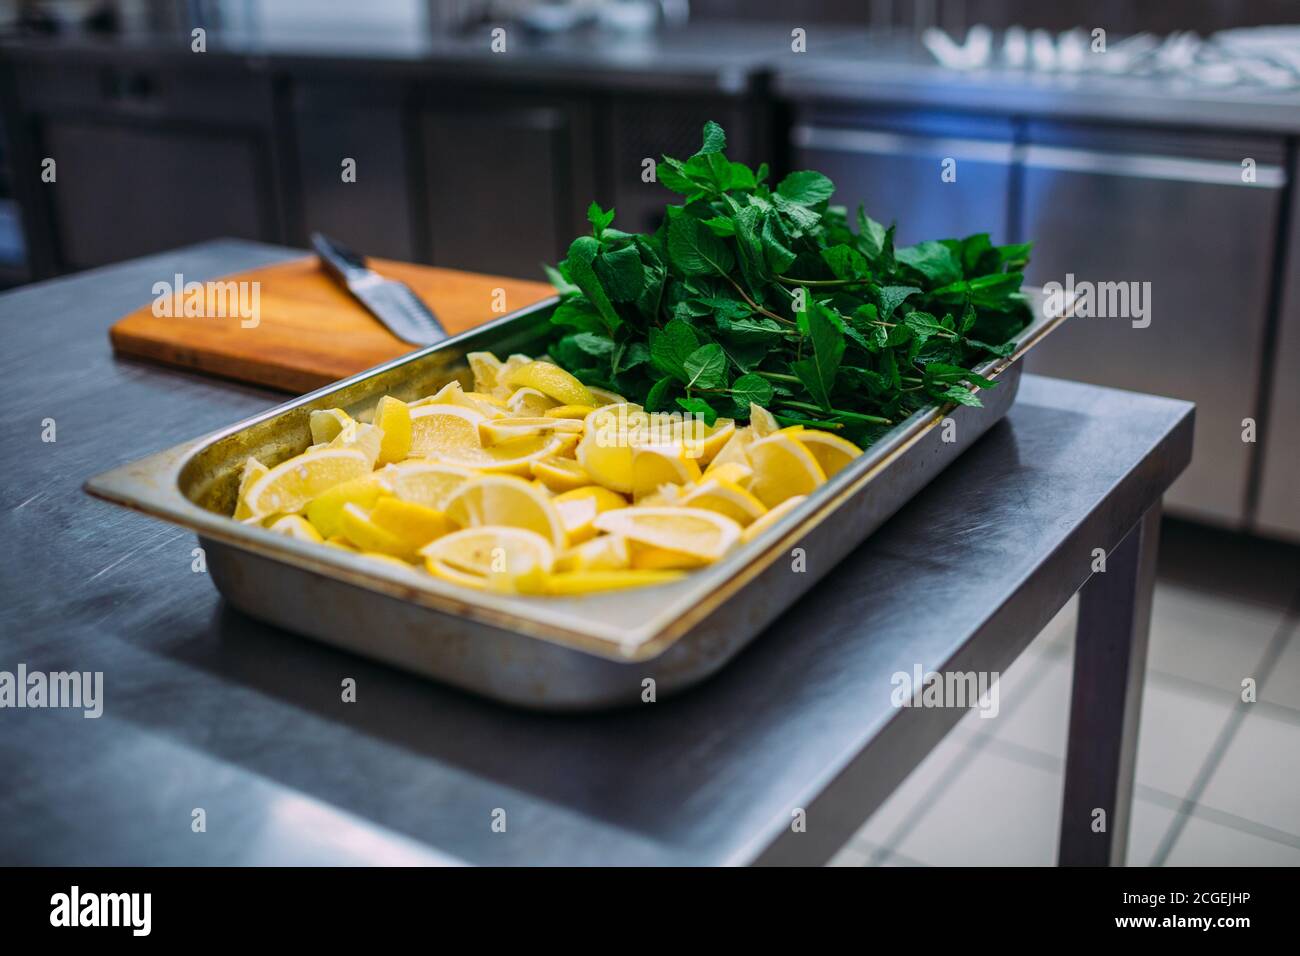 Preparing mojito ingredients in a restaurant kitchen. A lot of chopped lemon and mint. Stock Photo